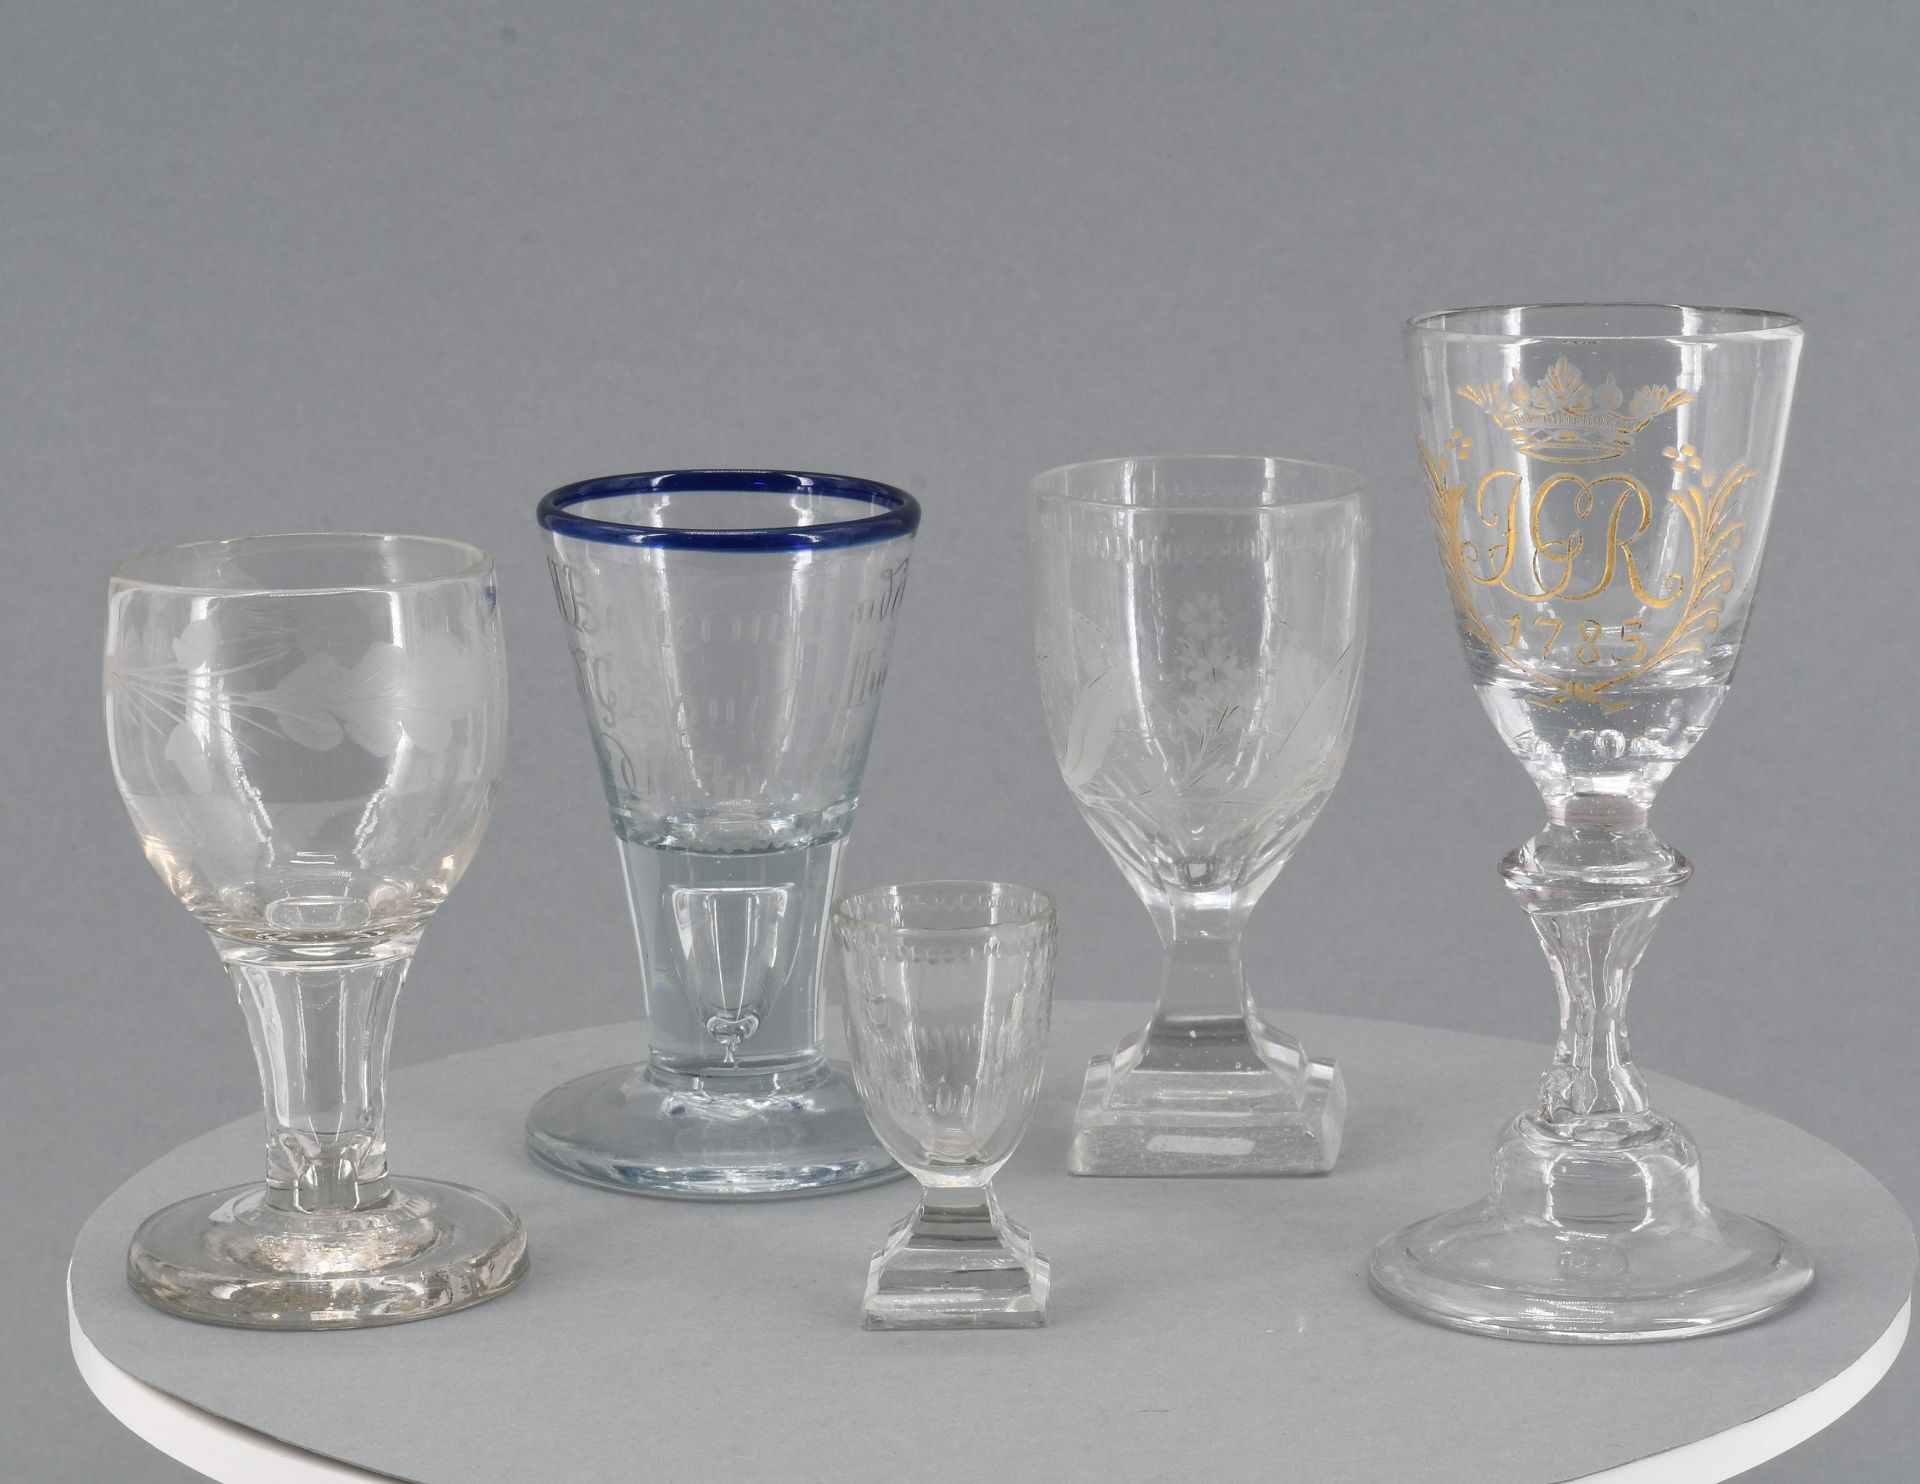 Goblet with monogram and schnapps glass with blue rim